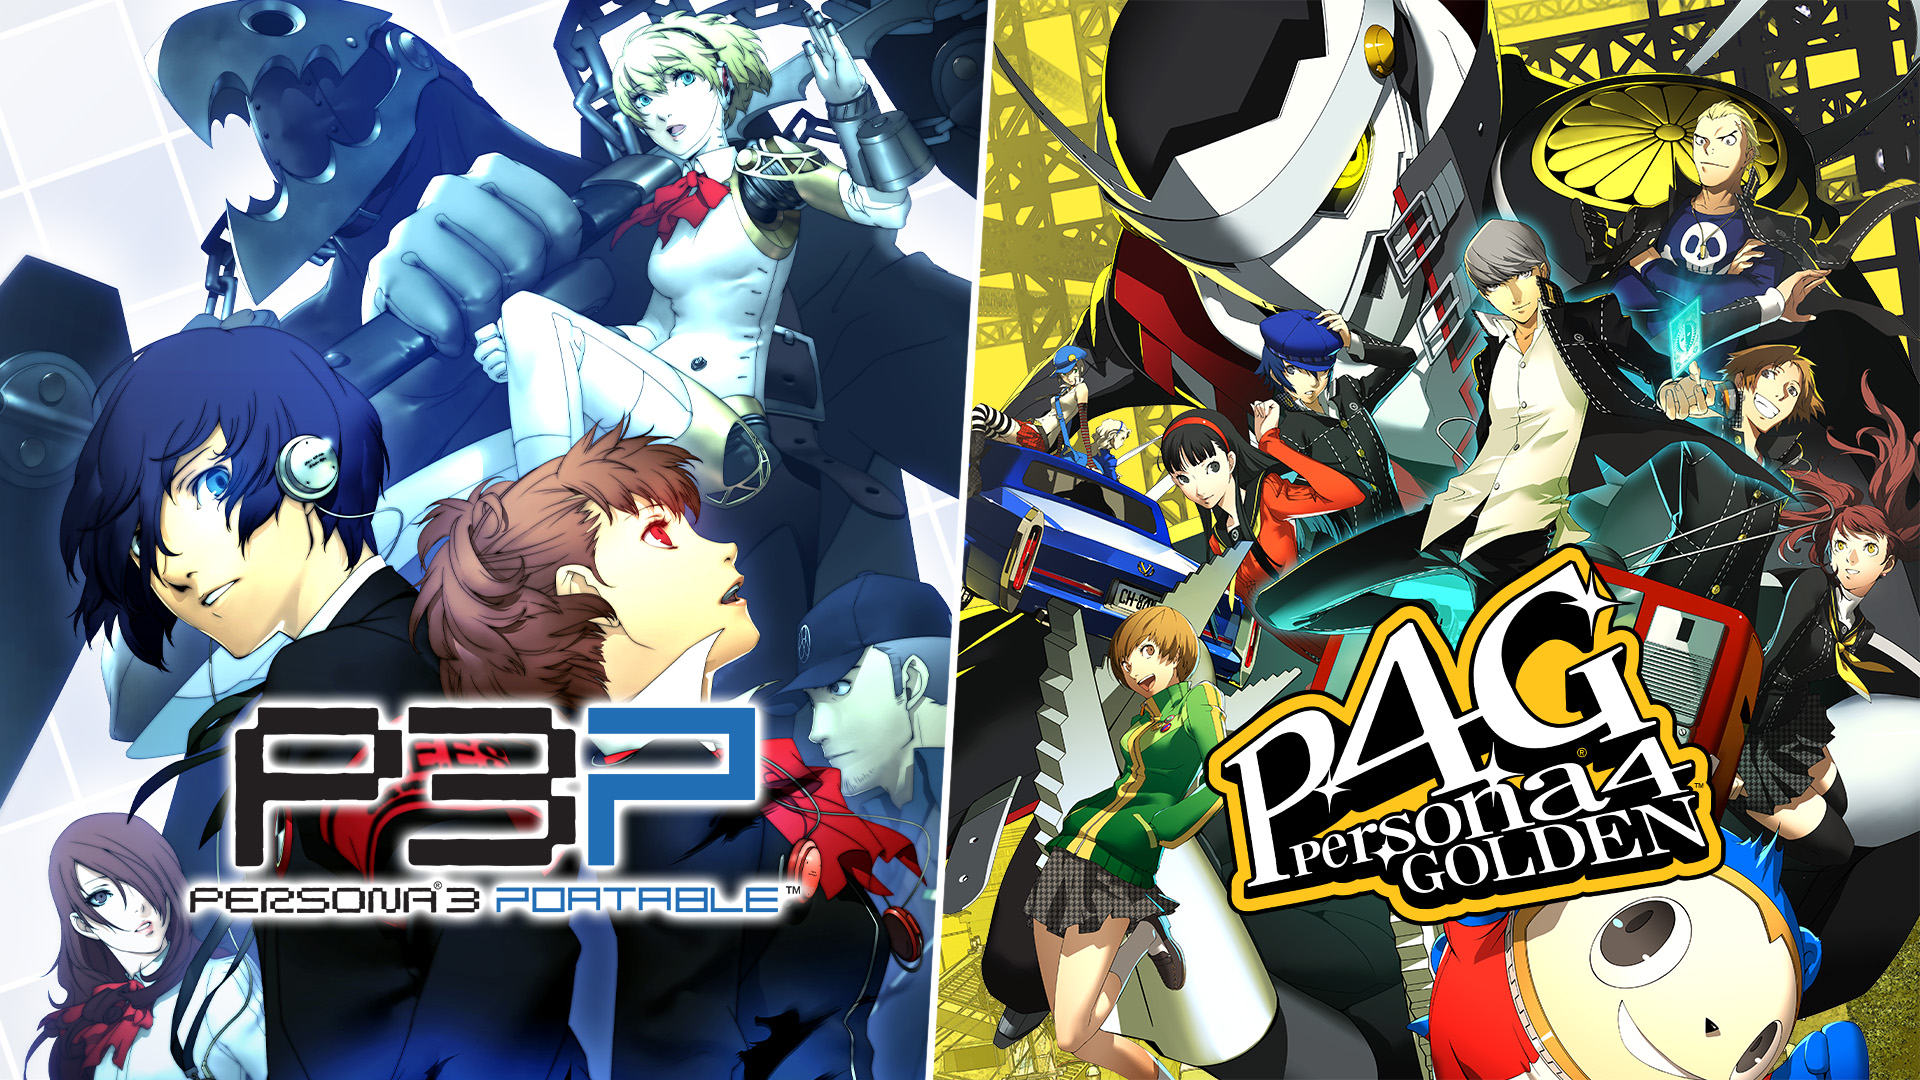 Persona 3 Portable and Persona 4 Golden preorders live for Xbox, PlayStation, and more